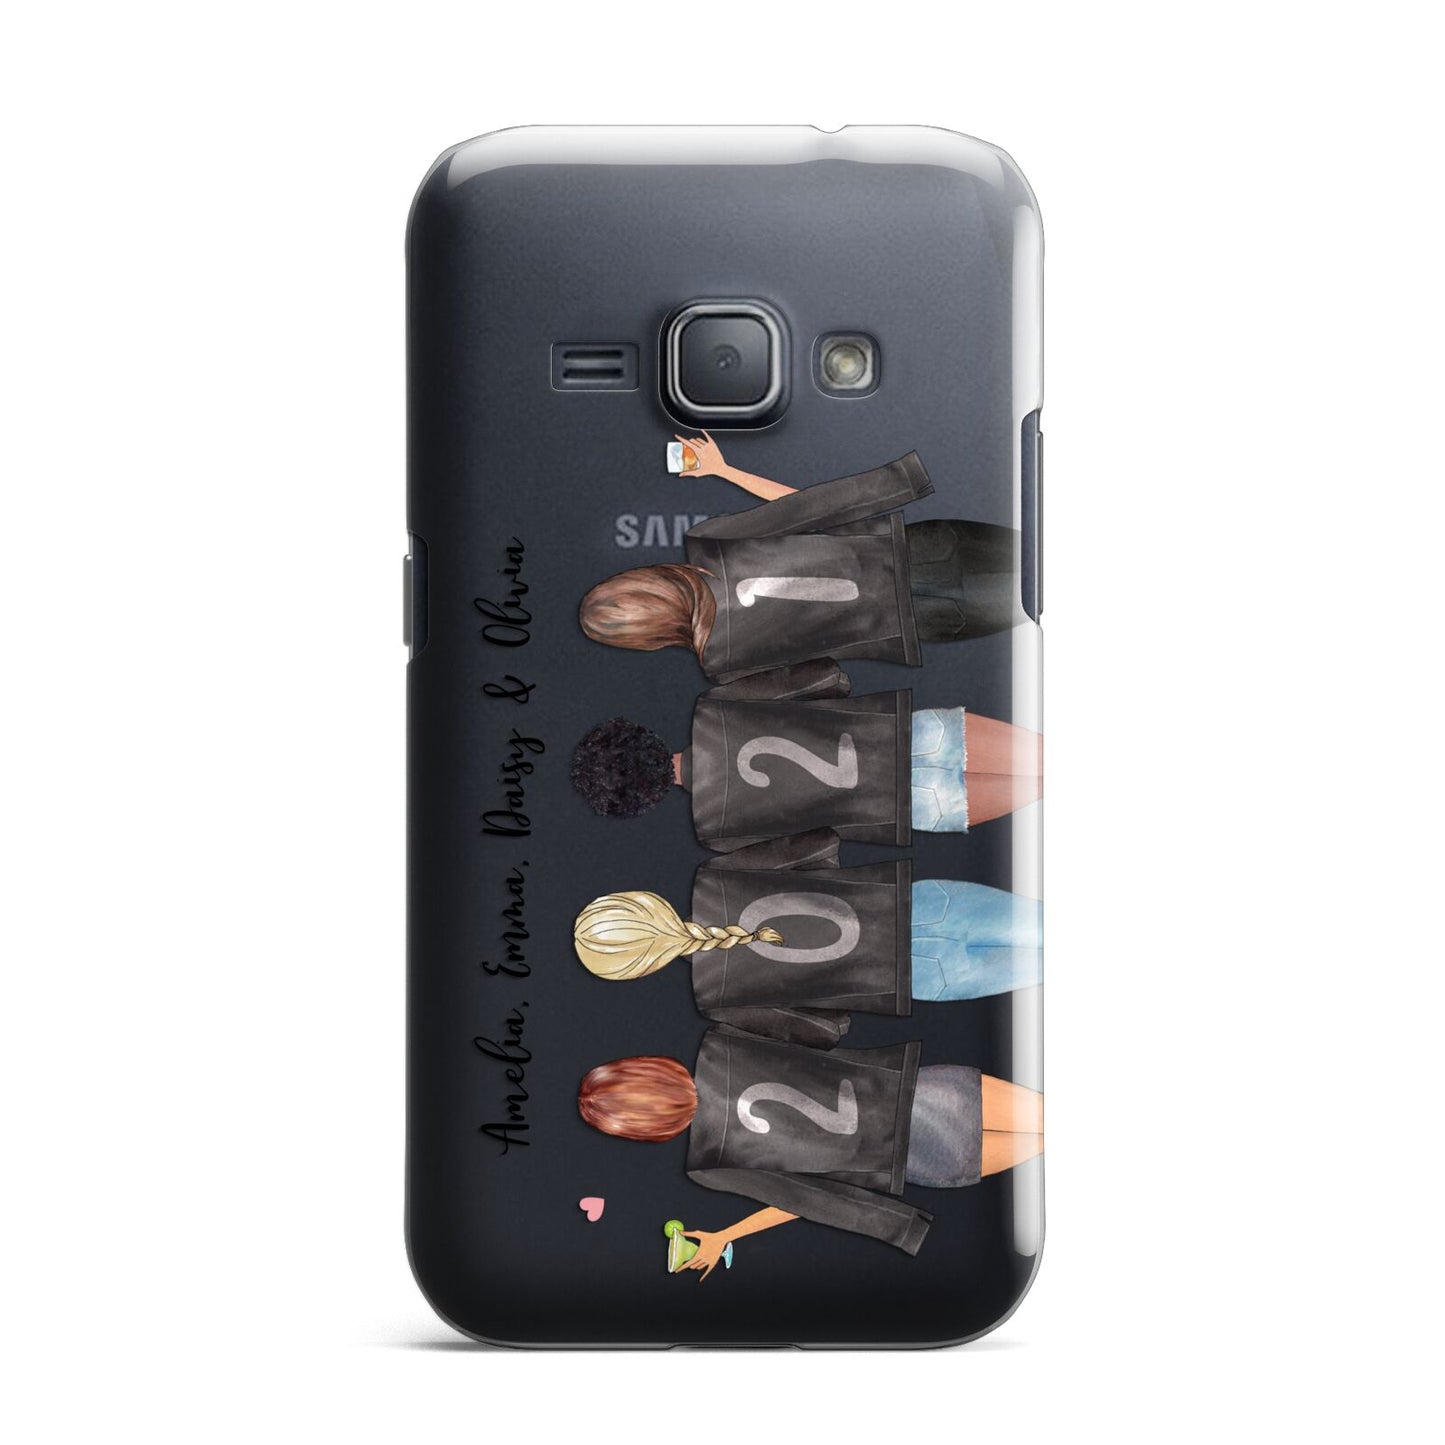 4 Best Friends with Names Samsung Galaxy J1 2016 Case